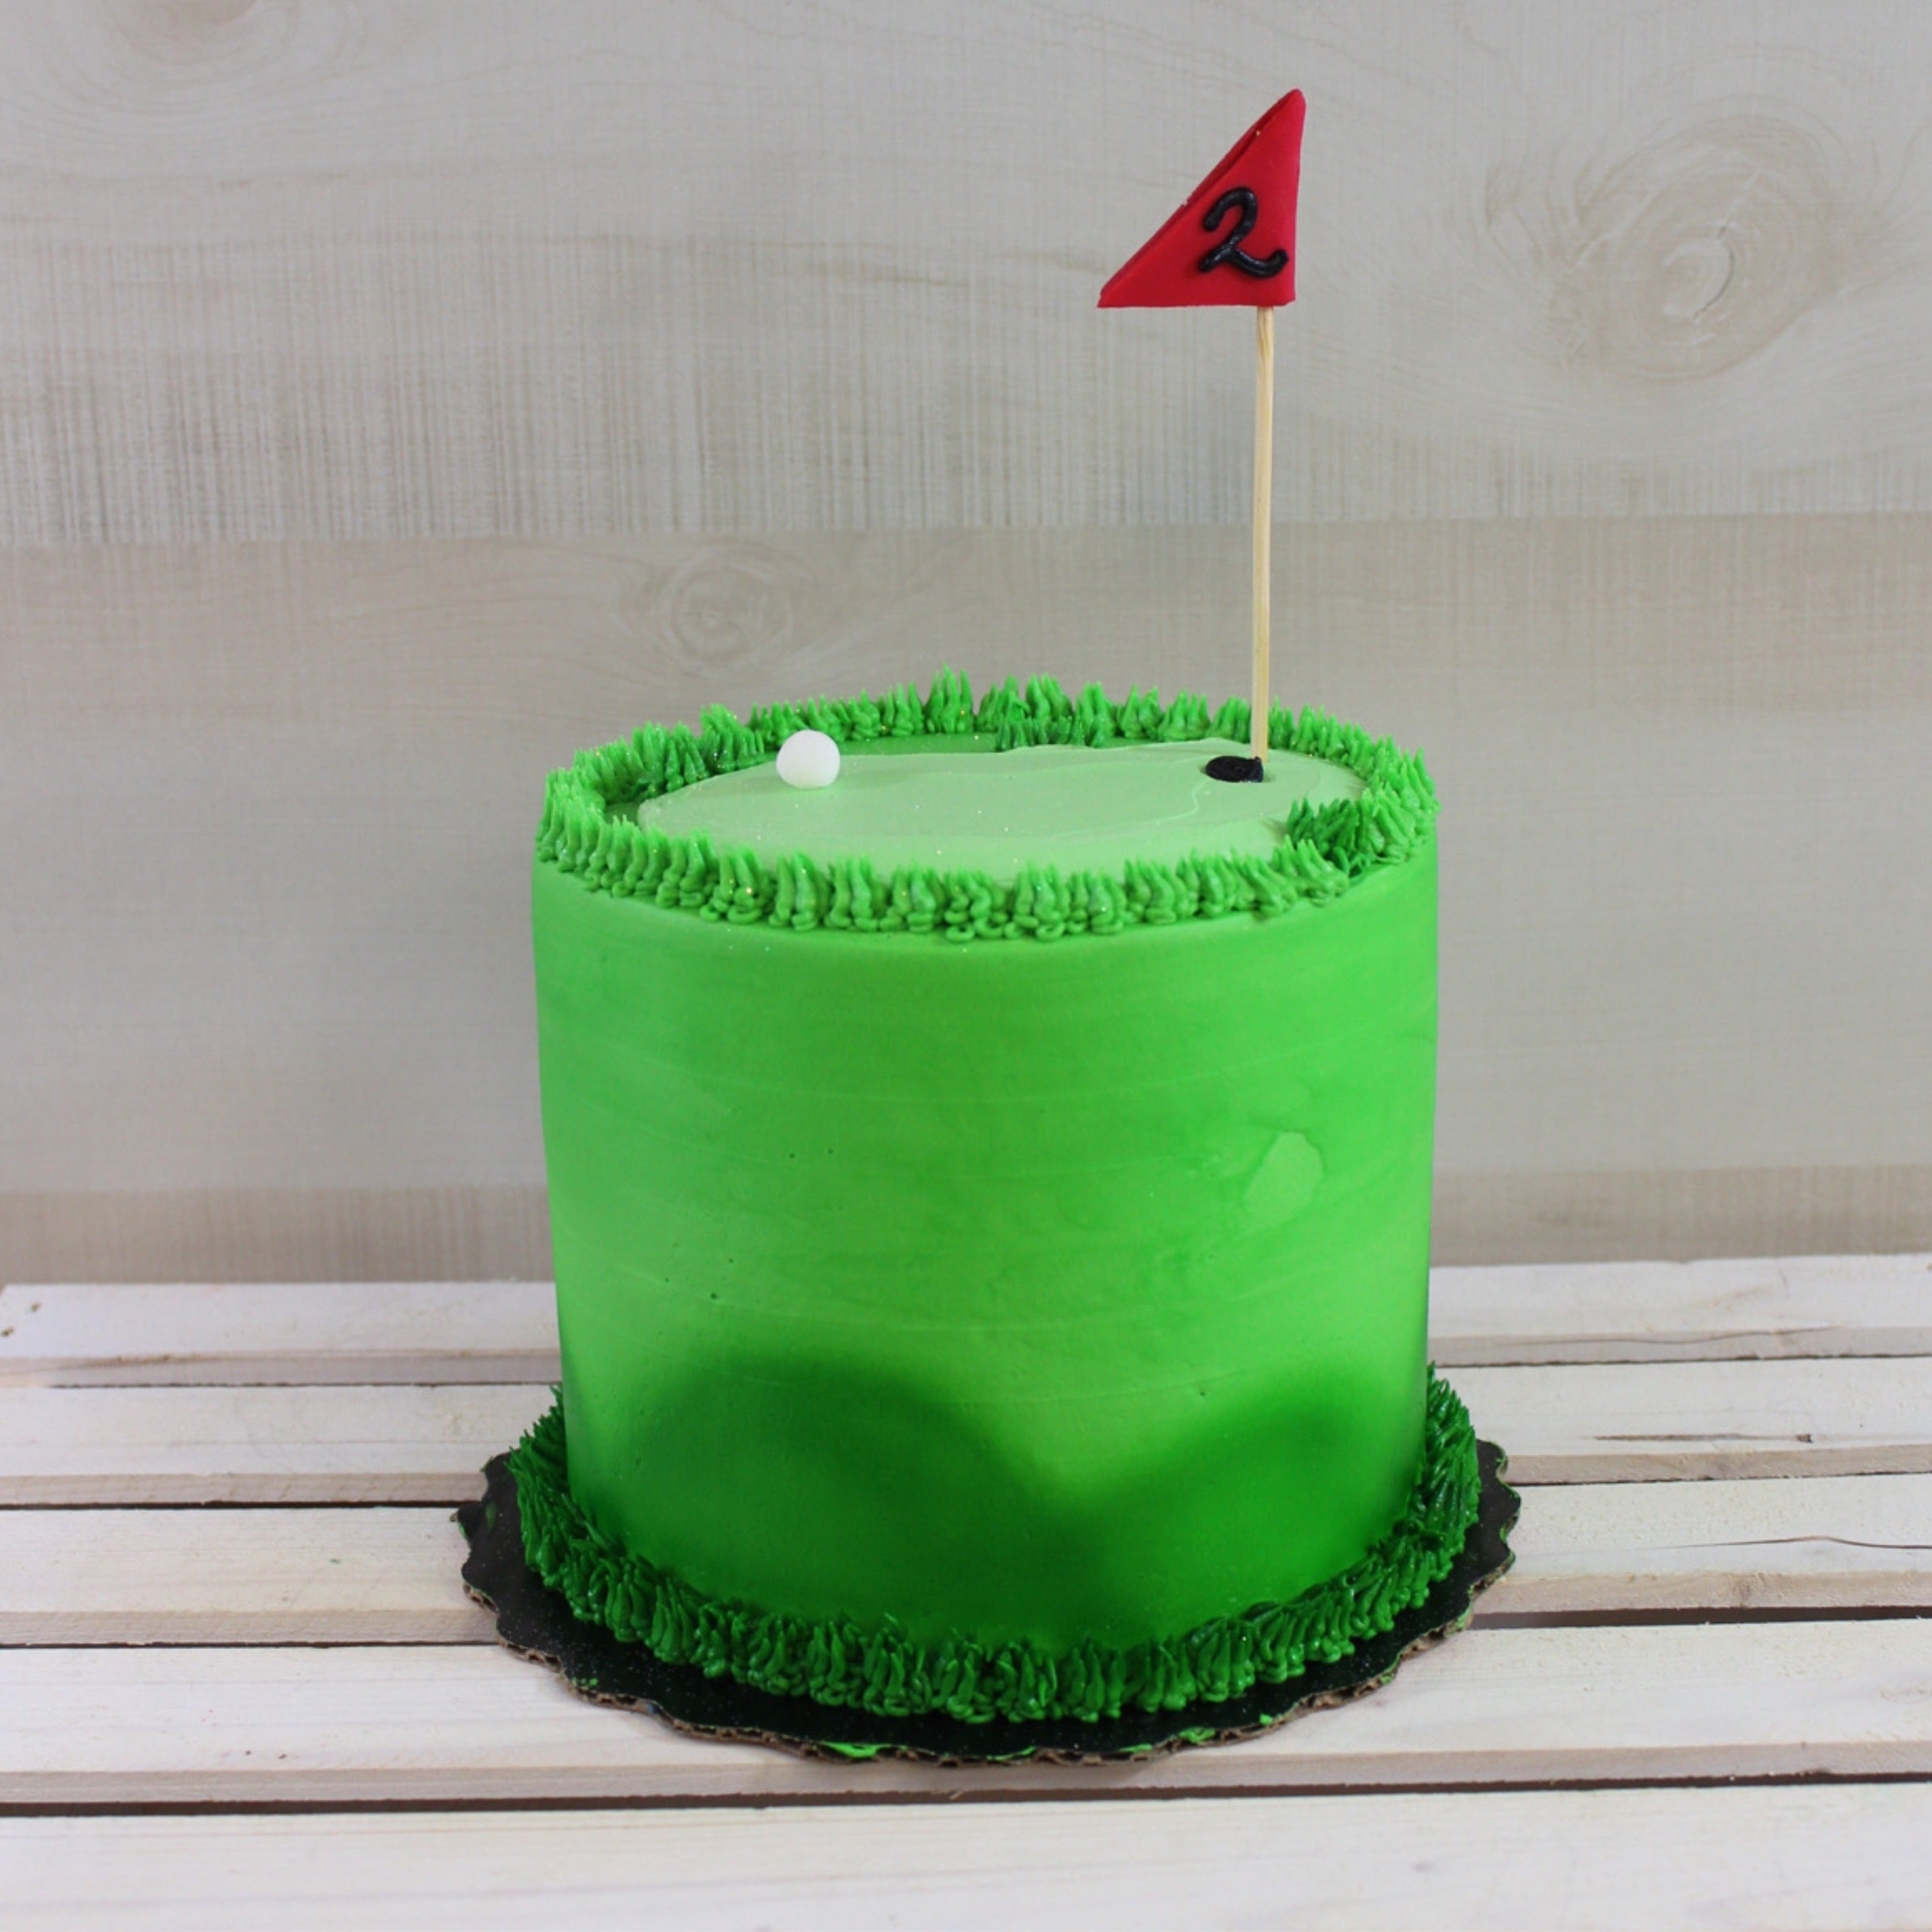 Swinging into marital bliss with this hole-in-one golf-themed grooms cake!  ⛳️🍰 Fore-tastic! 🏌️‍♂️✨ #GolfThemedCake #GroomsCake… | Instagram